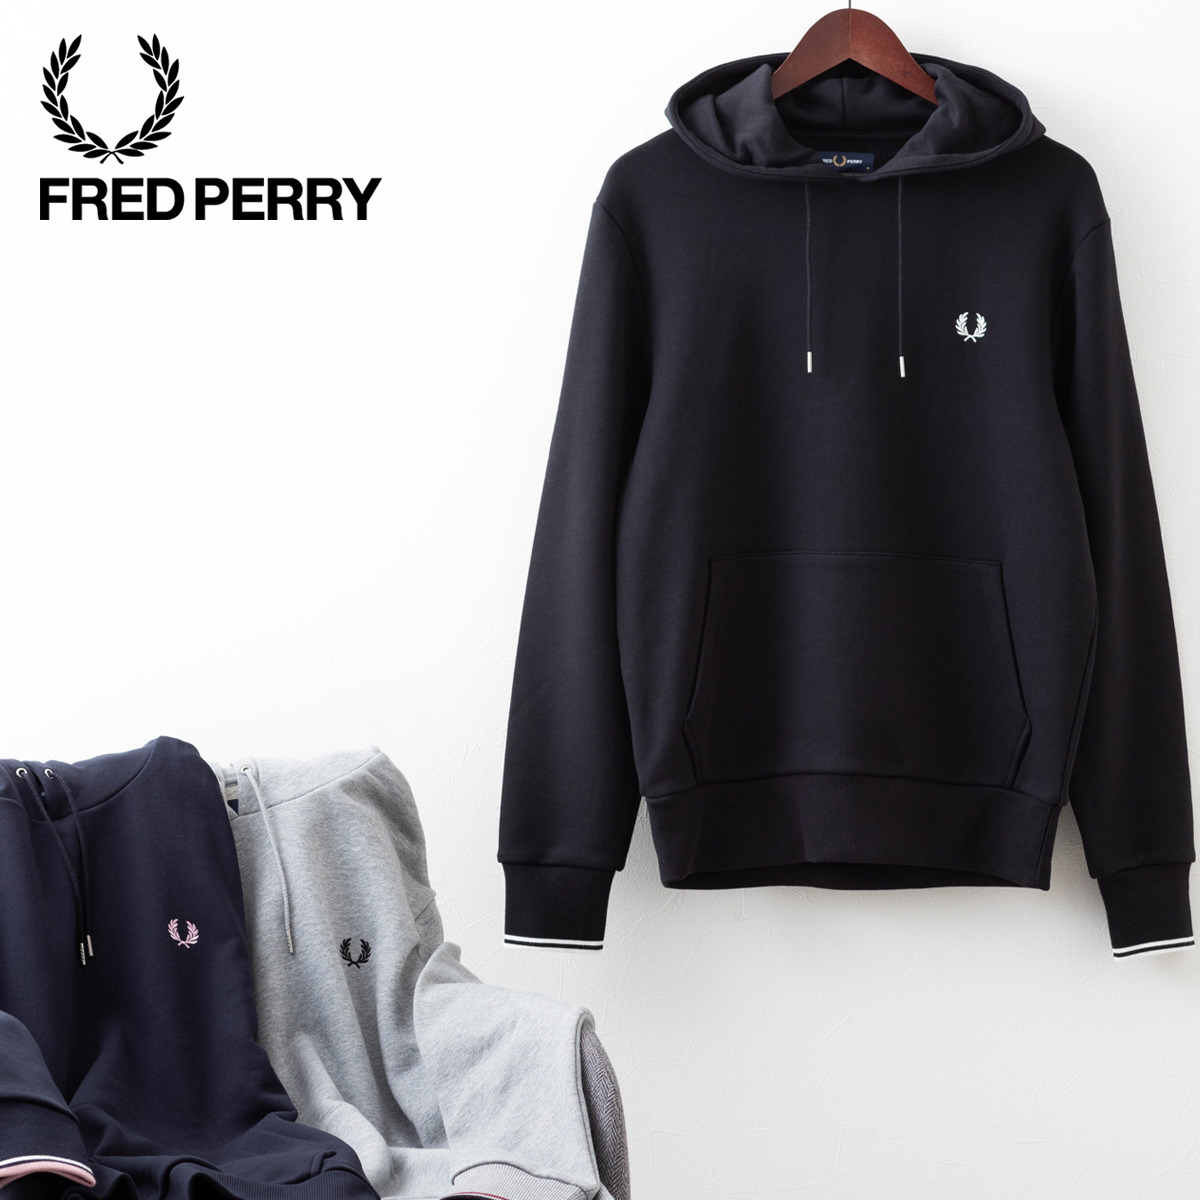 FRED PERRY - FRED PERRY フレッドペリー ジップアップパーカー ベロア